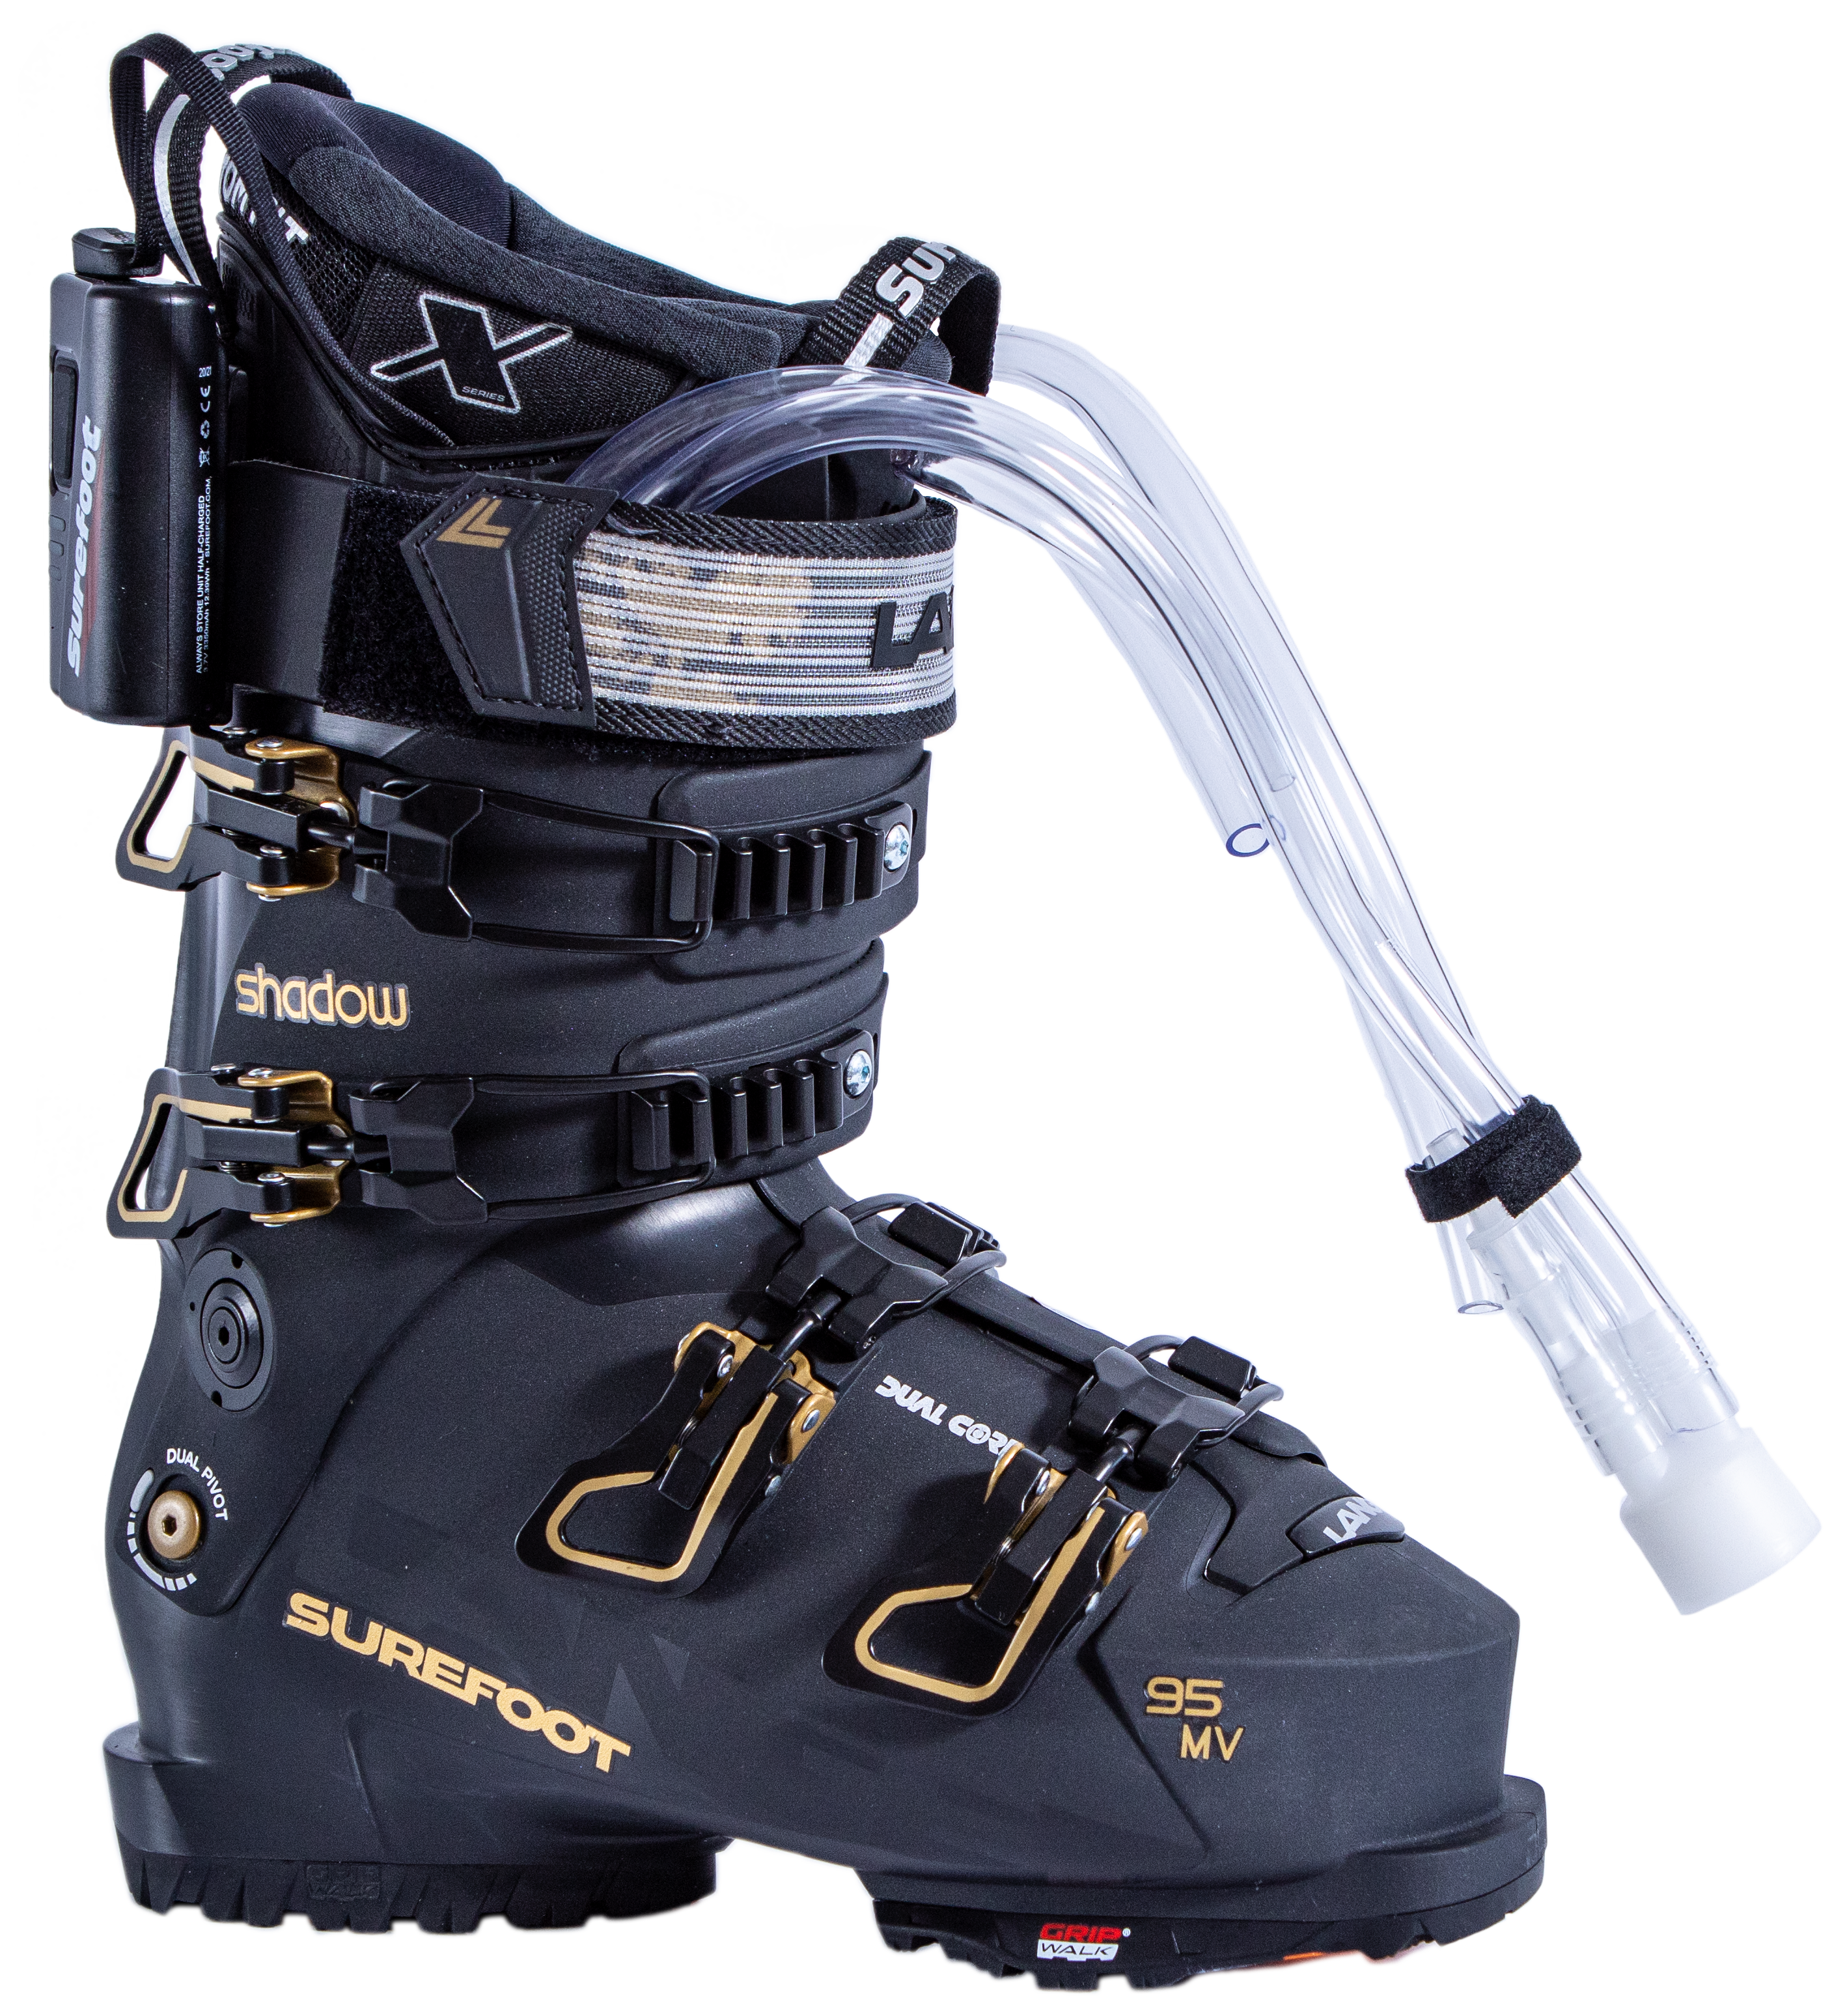 Surefoot Lange Shadow 95 MV matte black ski boot shell with gold accents on buckles and Lange logo in black on power strap, Surefoot logo in gold. Plastic tubes coming out for Surefoot memory foam injection into shell lining. Winterheat ski boot heater attached to outside edge.